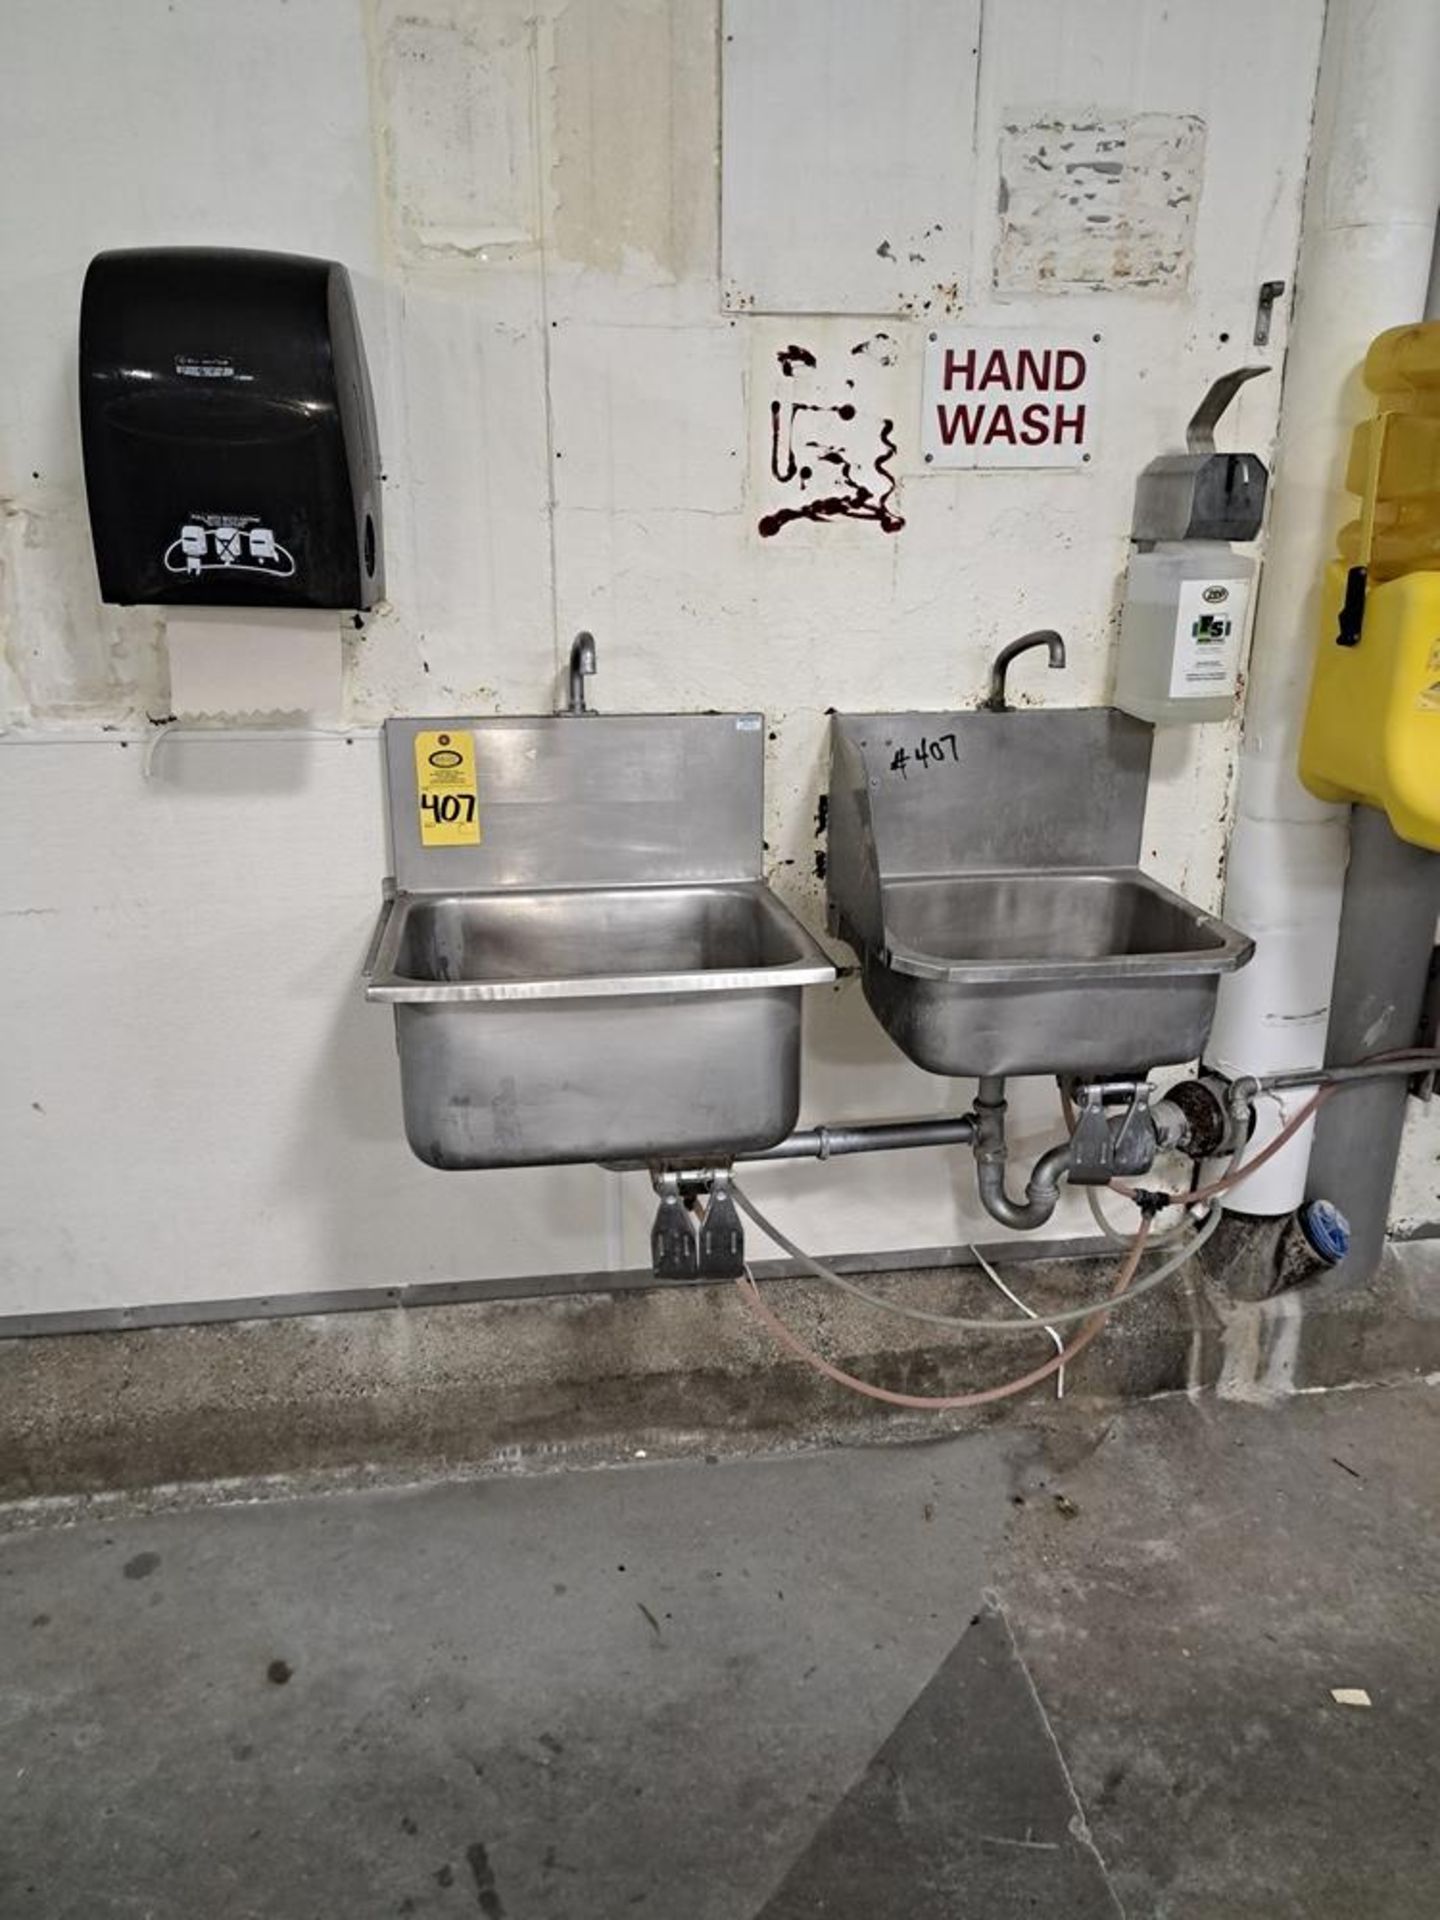 Lot (2) Hand Wash Sinks, knee activated, soap and towel dispenser: Required Loading Fee $100.00,